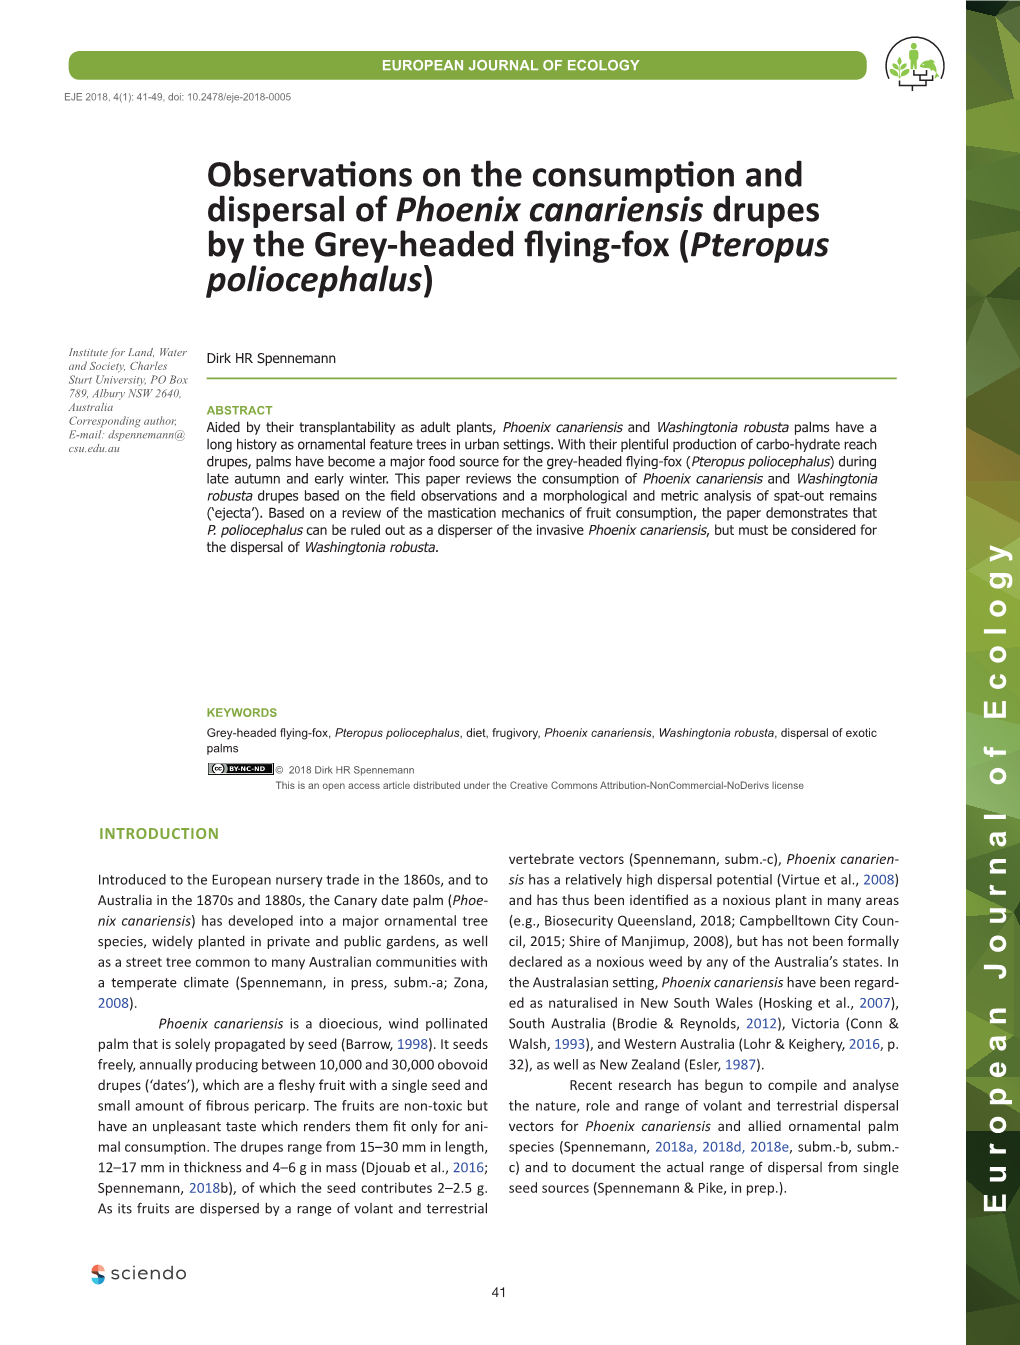 Observations on the Consumption and Dispersal of Phoenix Canariensis Drupes by the Grey-Headed Flying-Fox (Pteropus Poliocephalus)